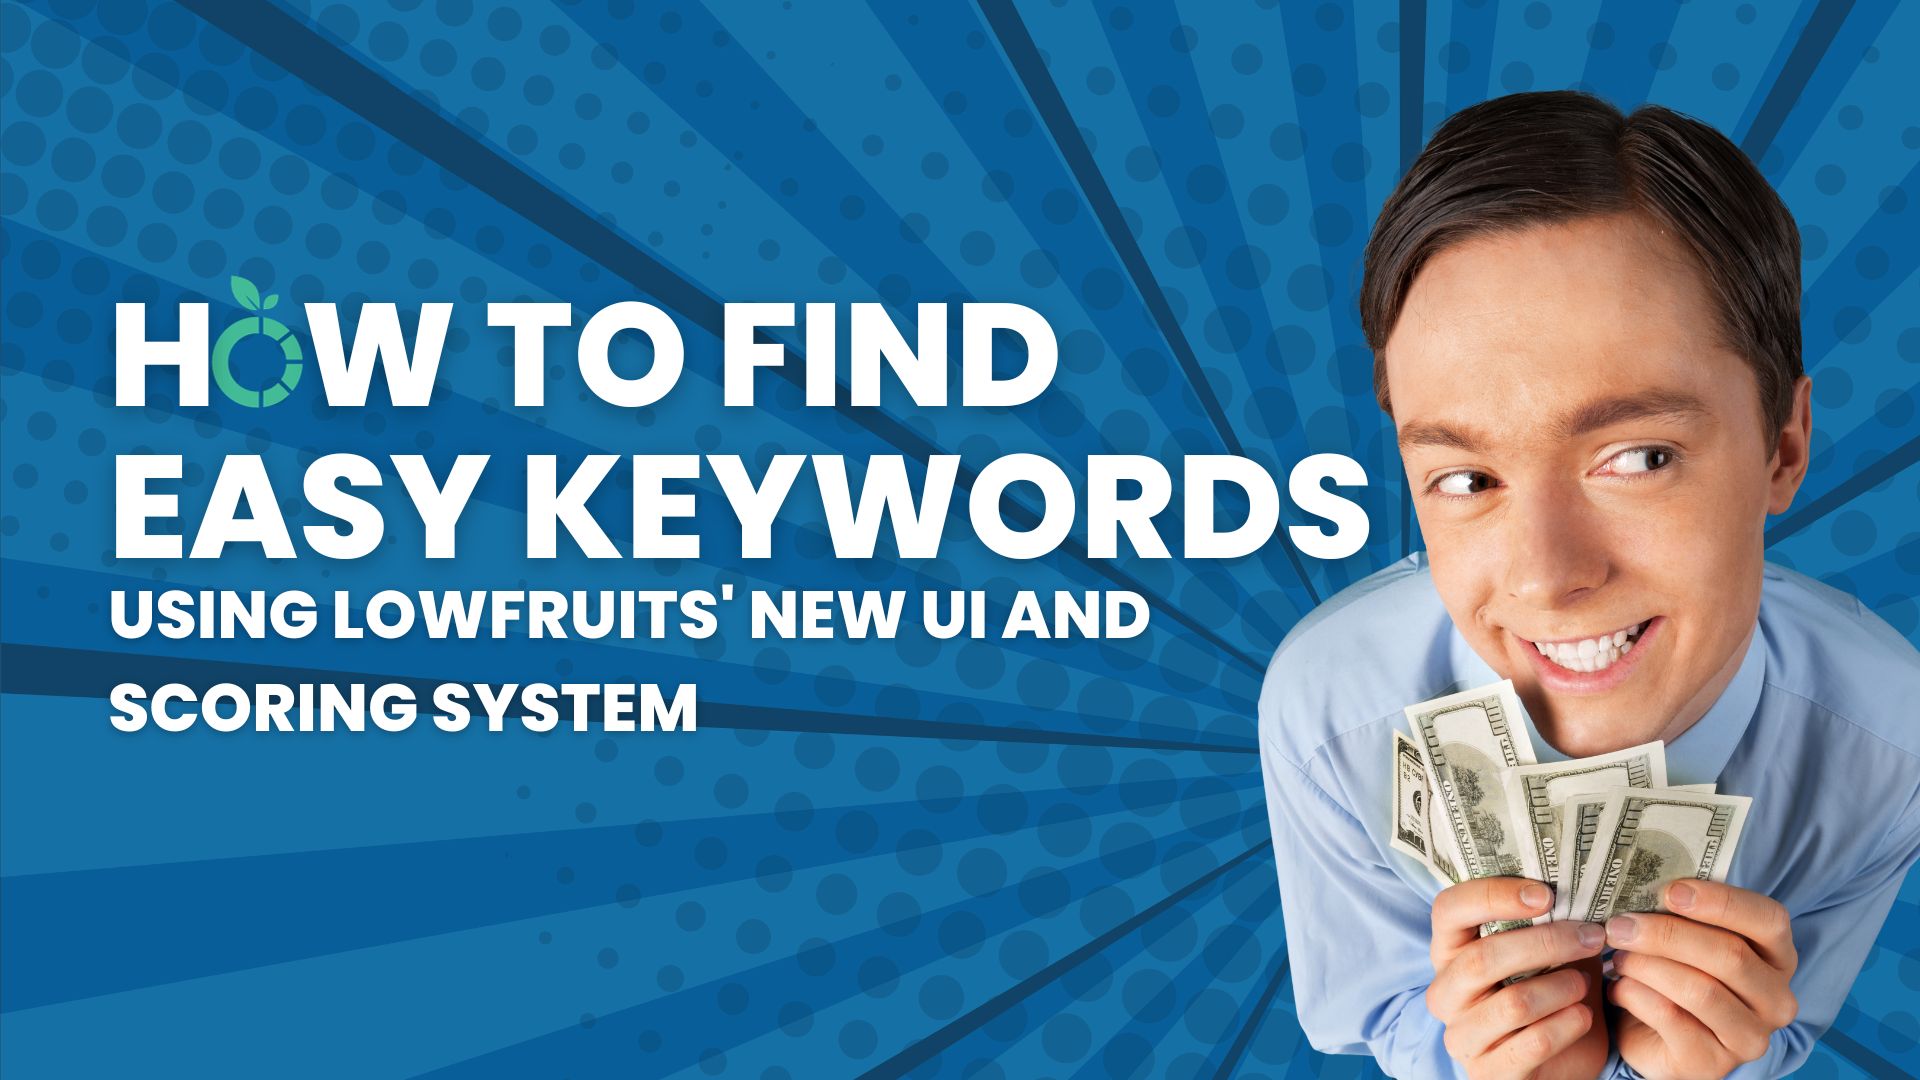 How to find LowFruits keywords using the new u and scoring system.